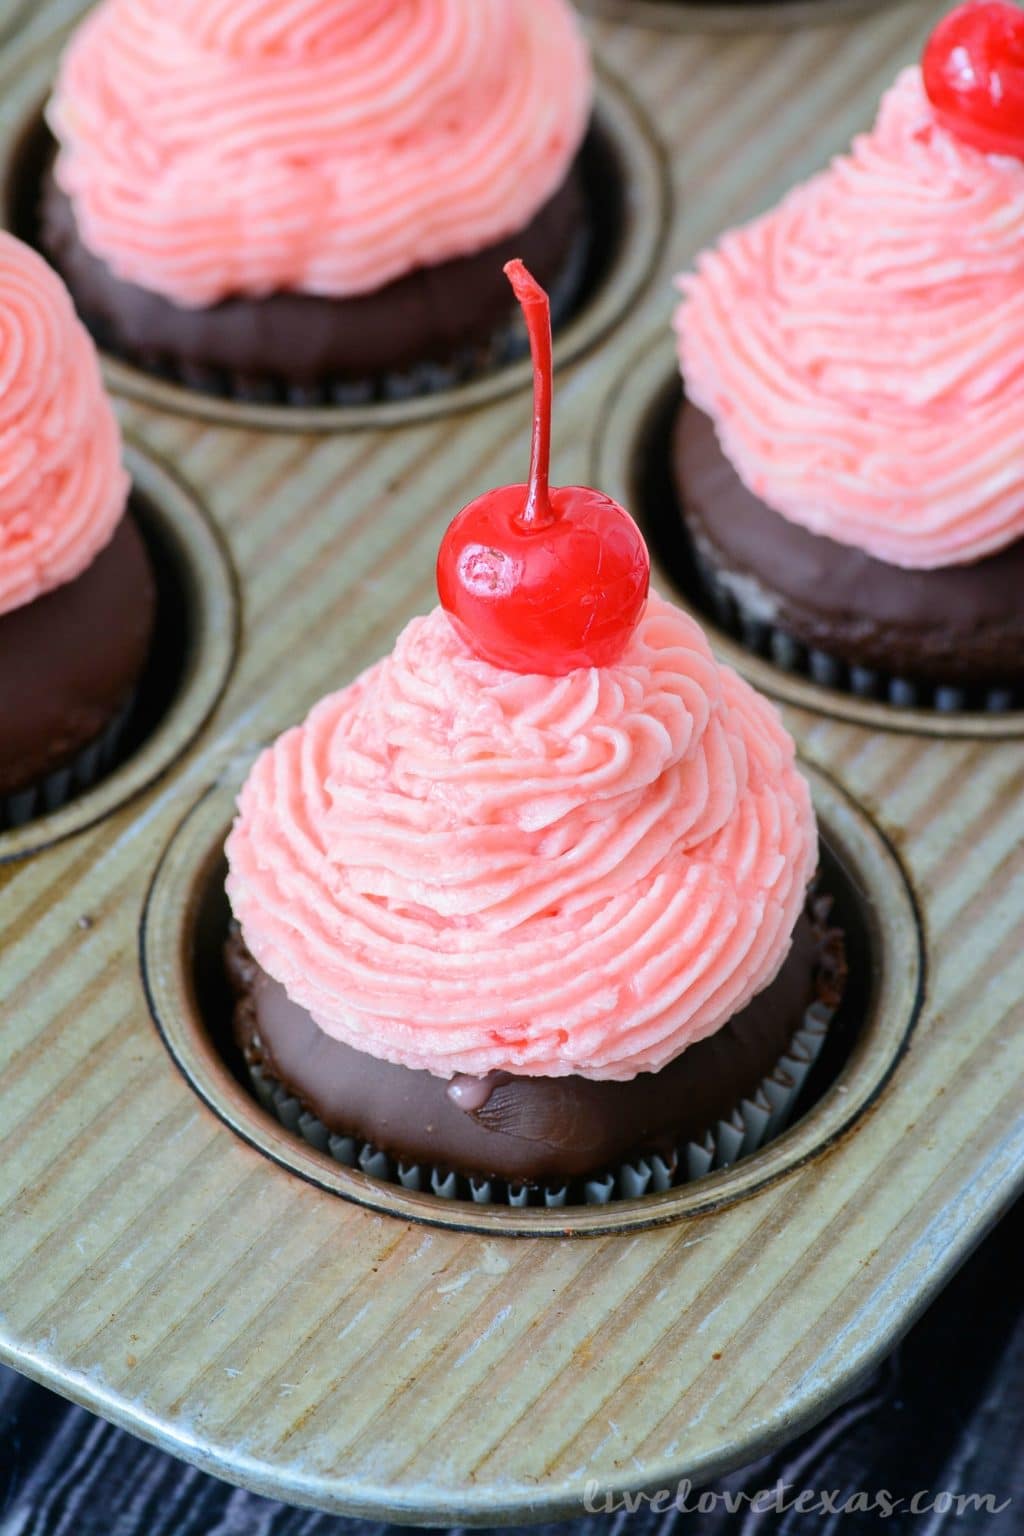 I know what I’m making on Valentine’s Day. These drool worthy Chocolate Ganache Cupcakes Recipe with Cherry Buttercream Frosting! Check out this ganache shortcut - you’ll love it! 